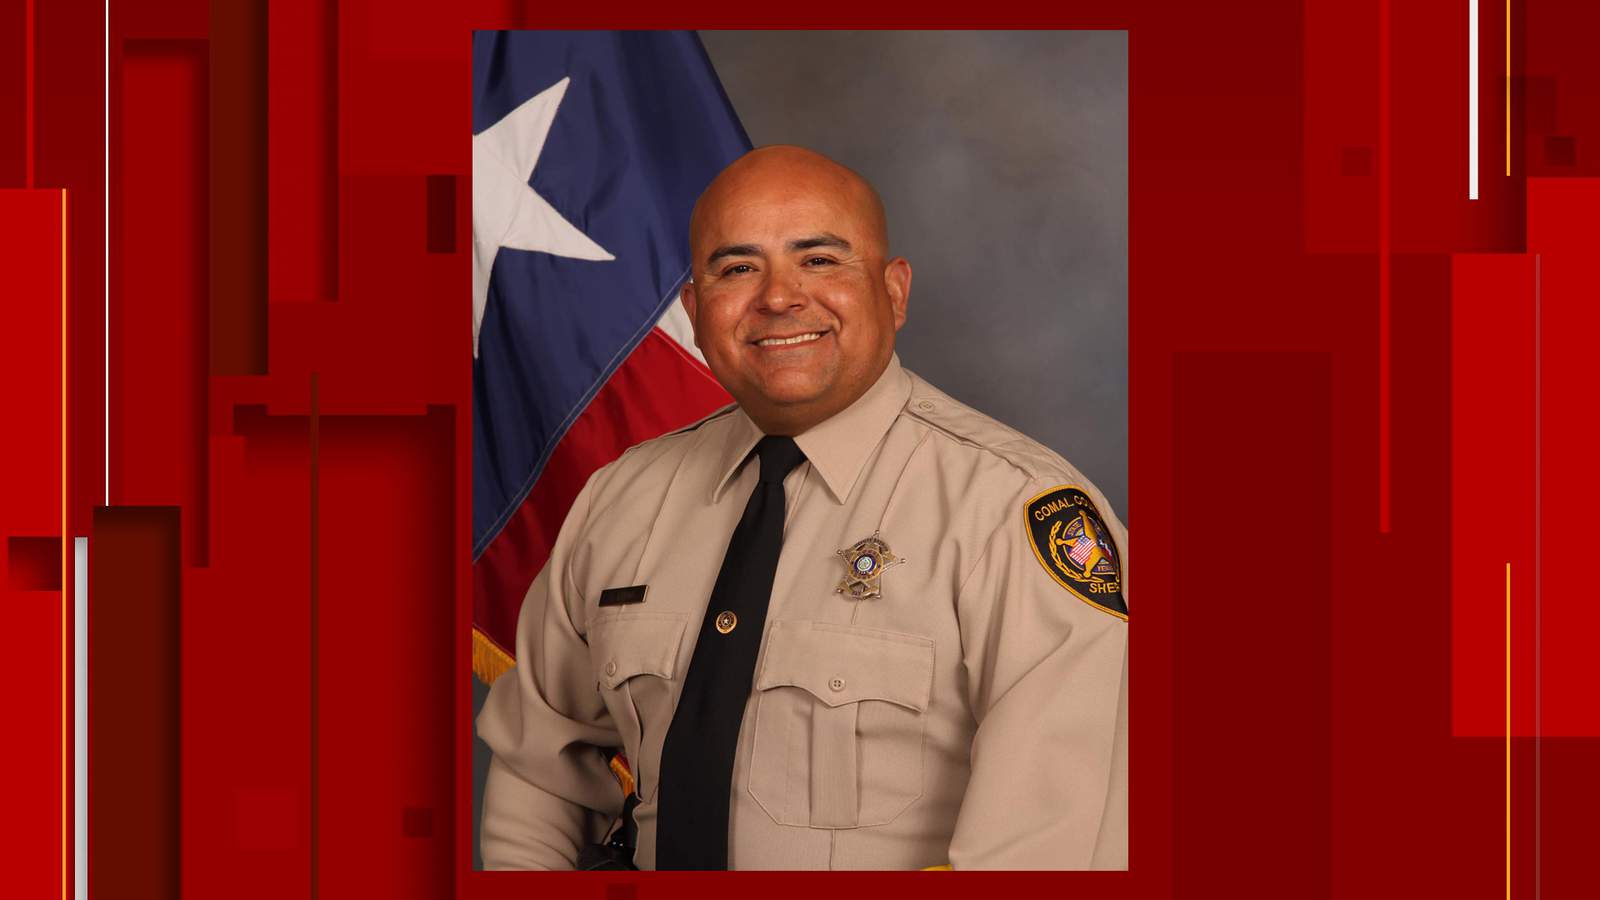 Comal County sheriff’s deputy shot while serving warrant